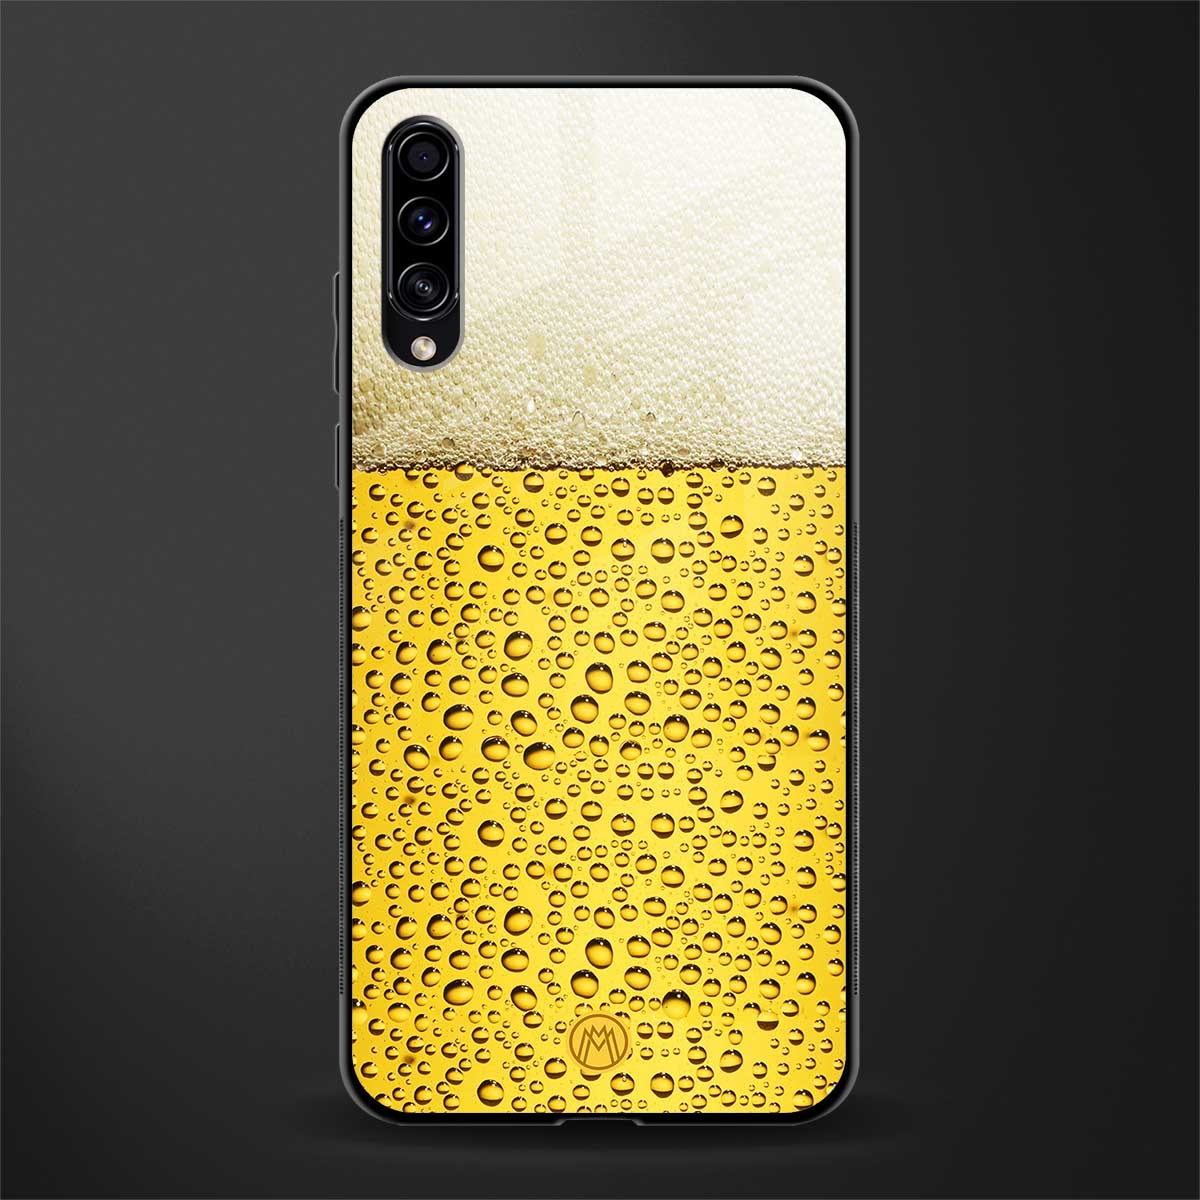 fizzy beer glass case for samsung galaxy a50 image